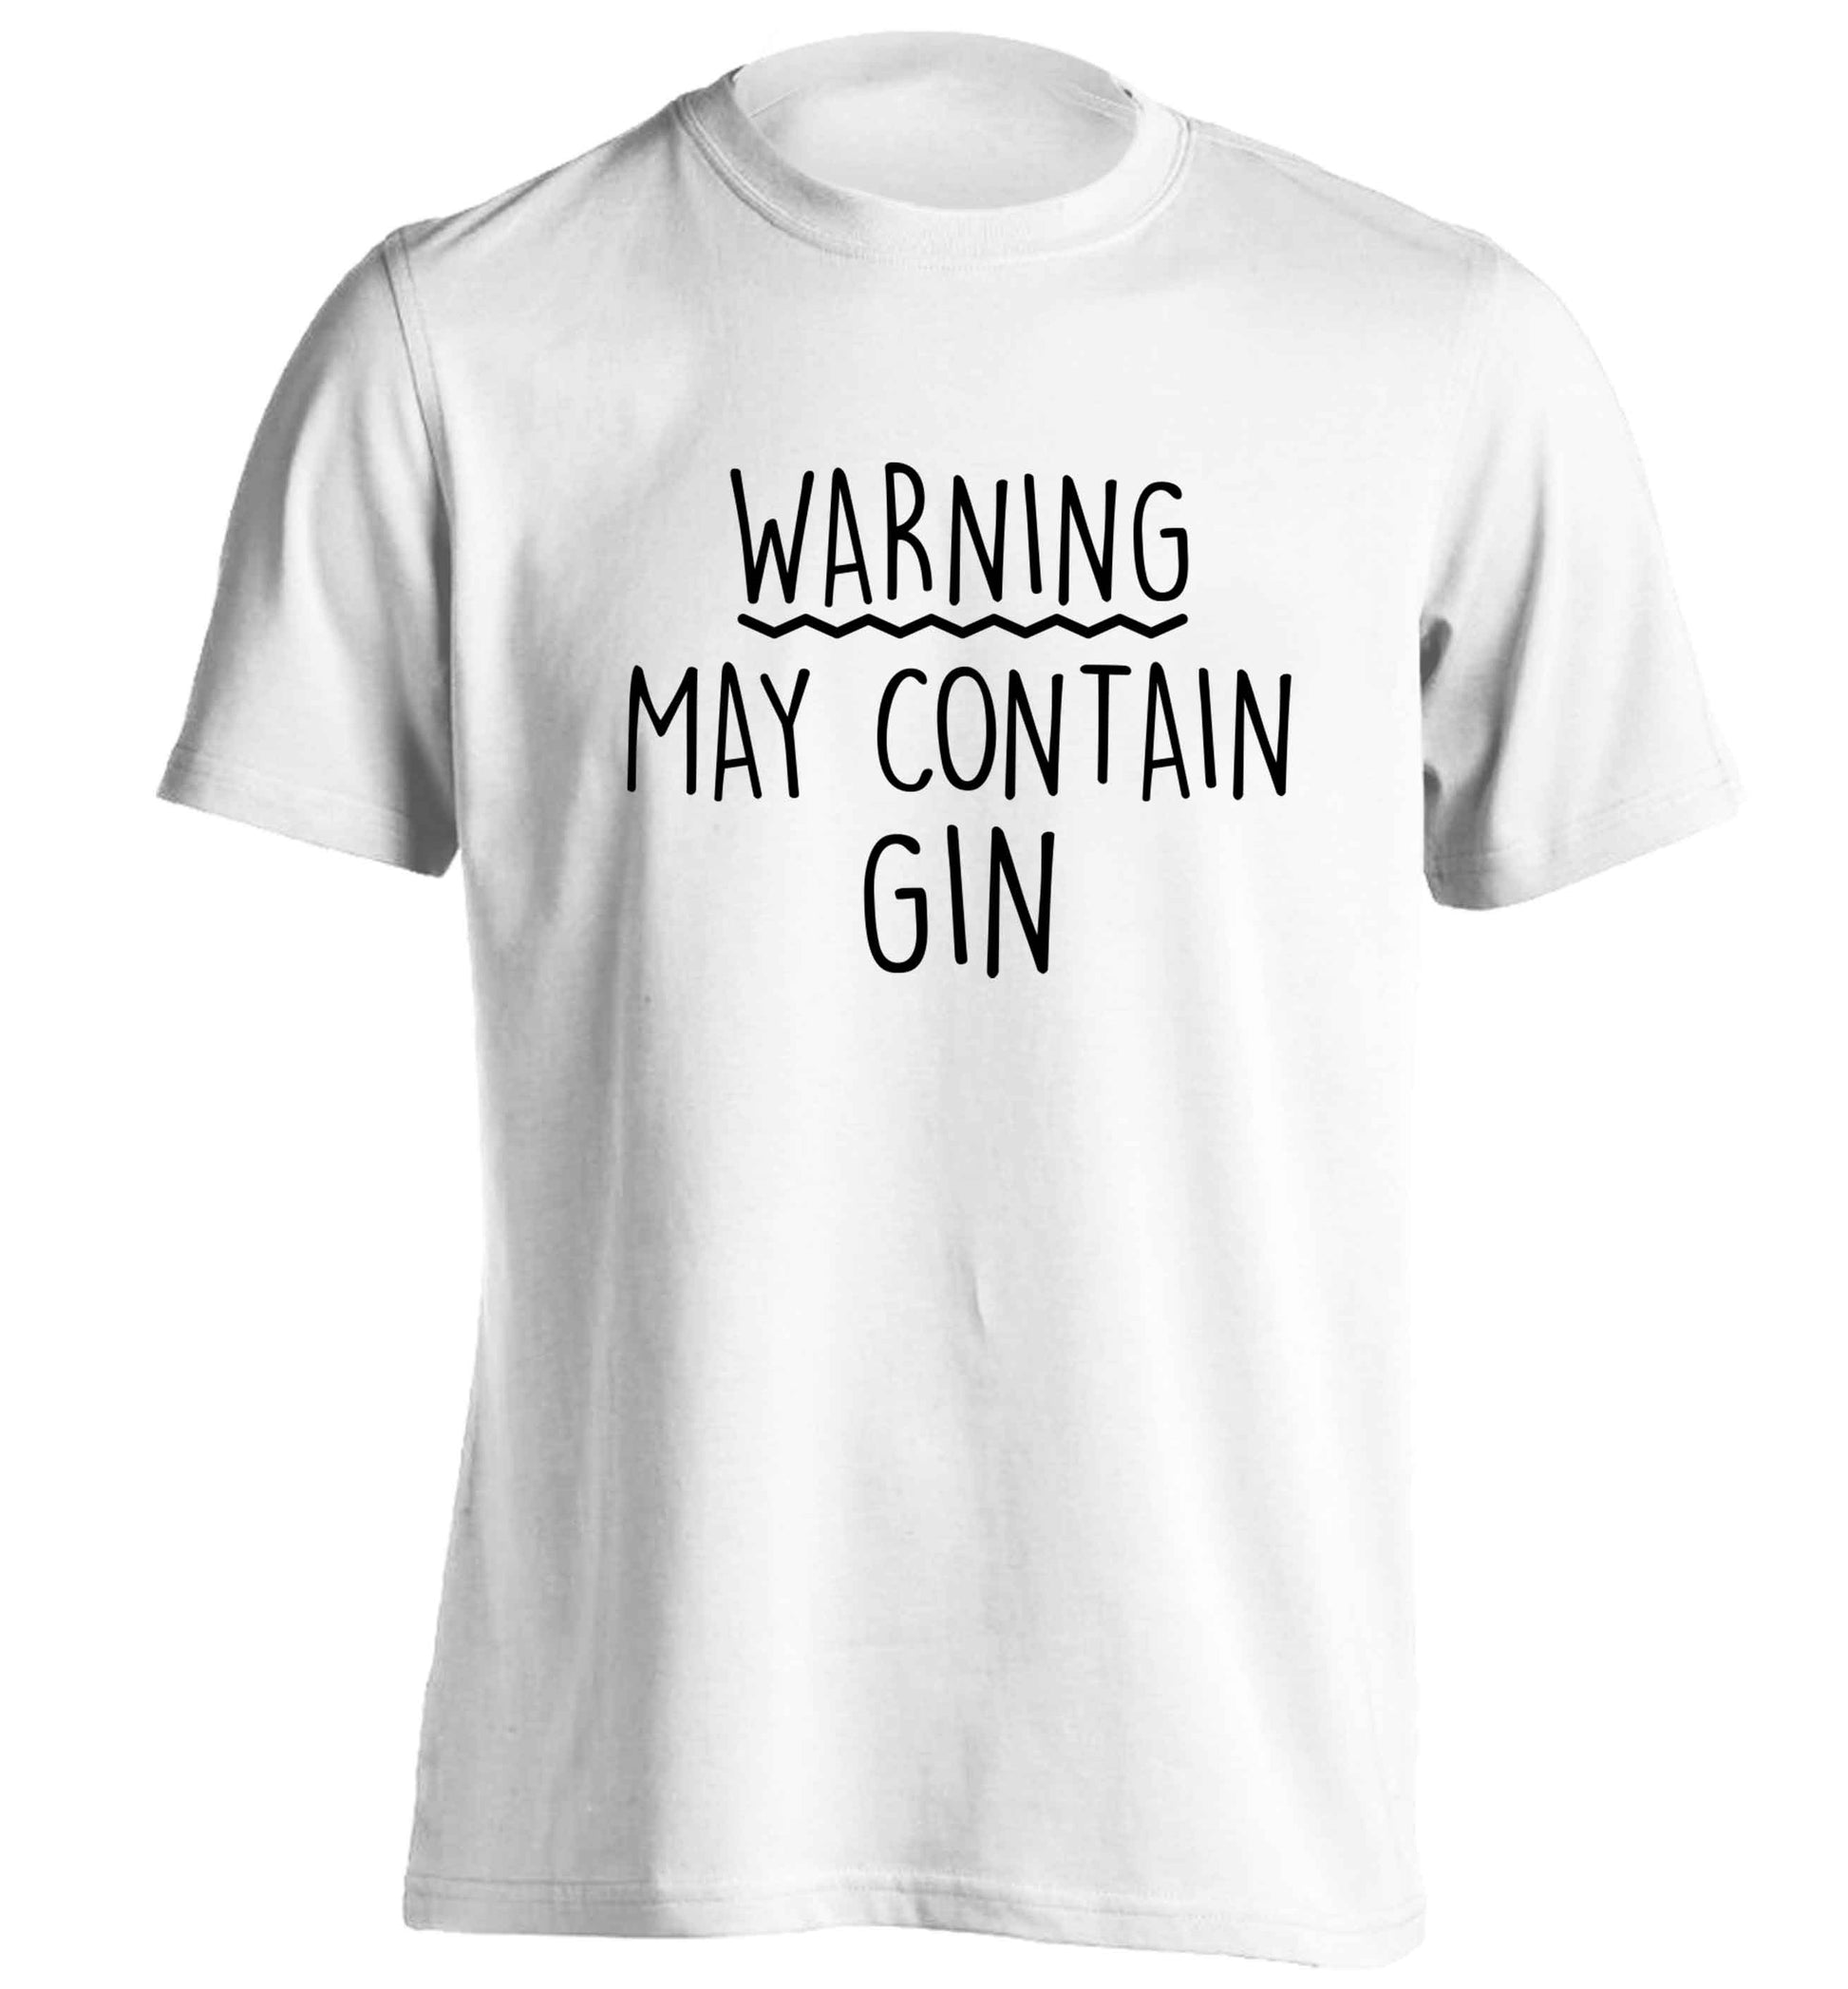 Warning may contain gin adults unisex white Tshirt 2XL